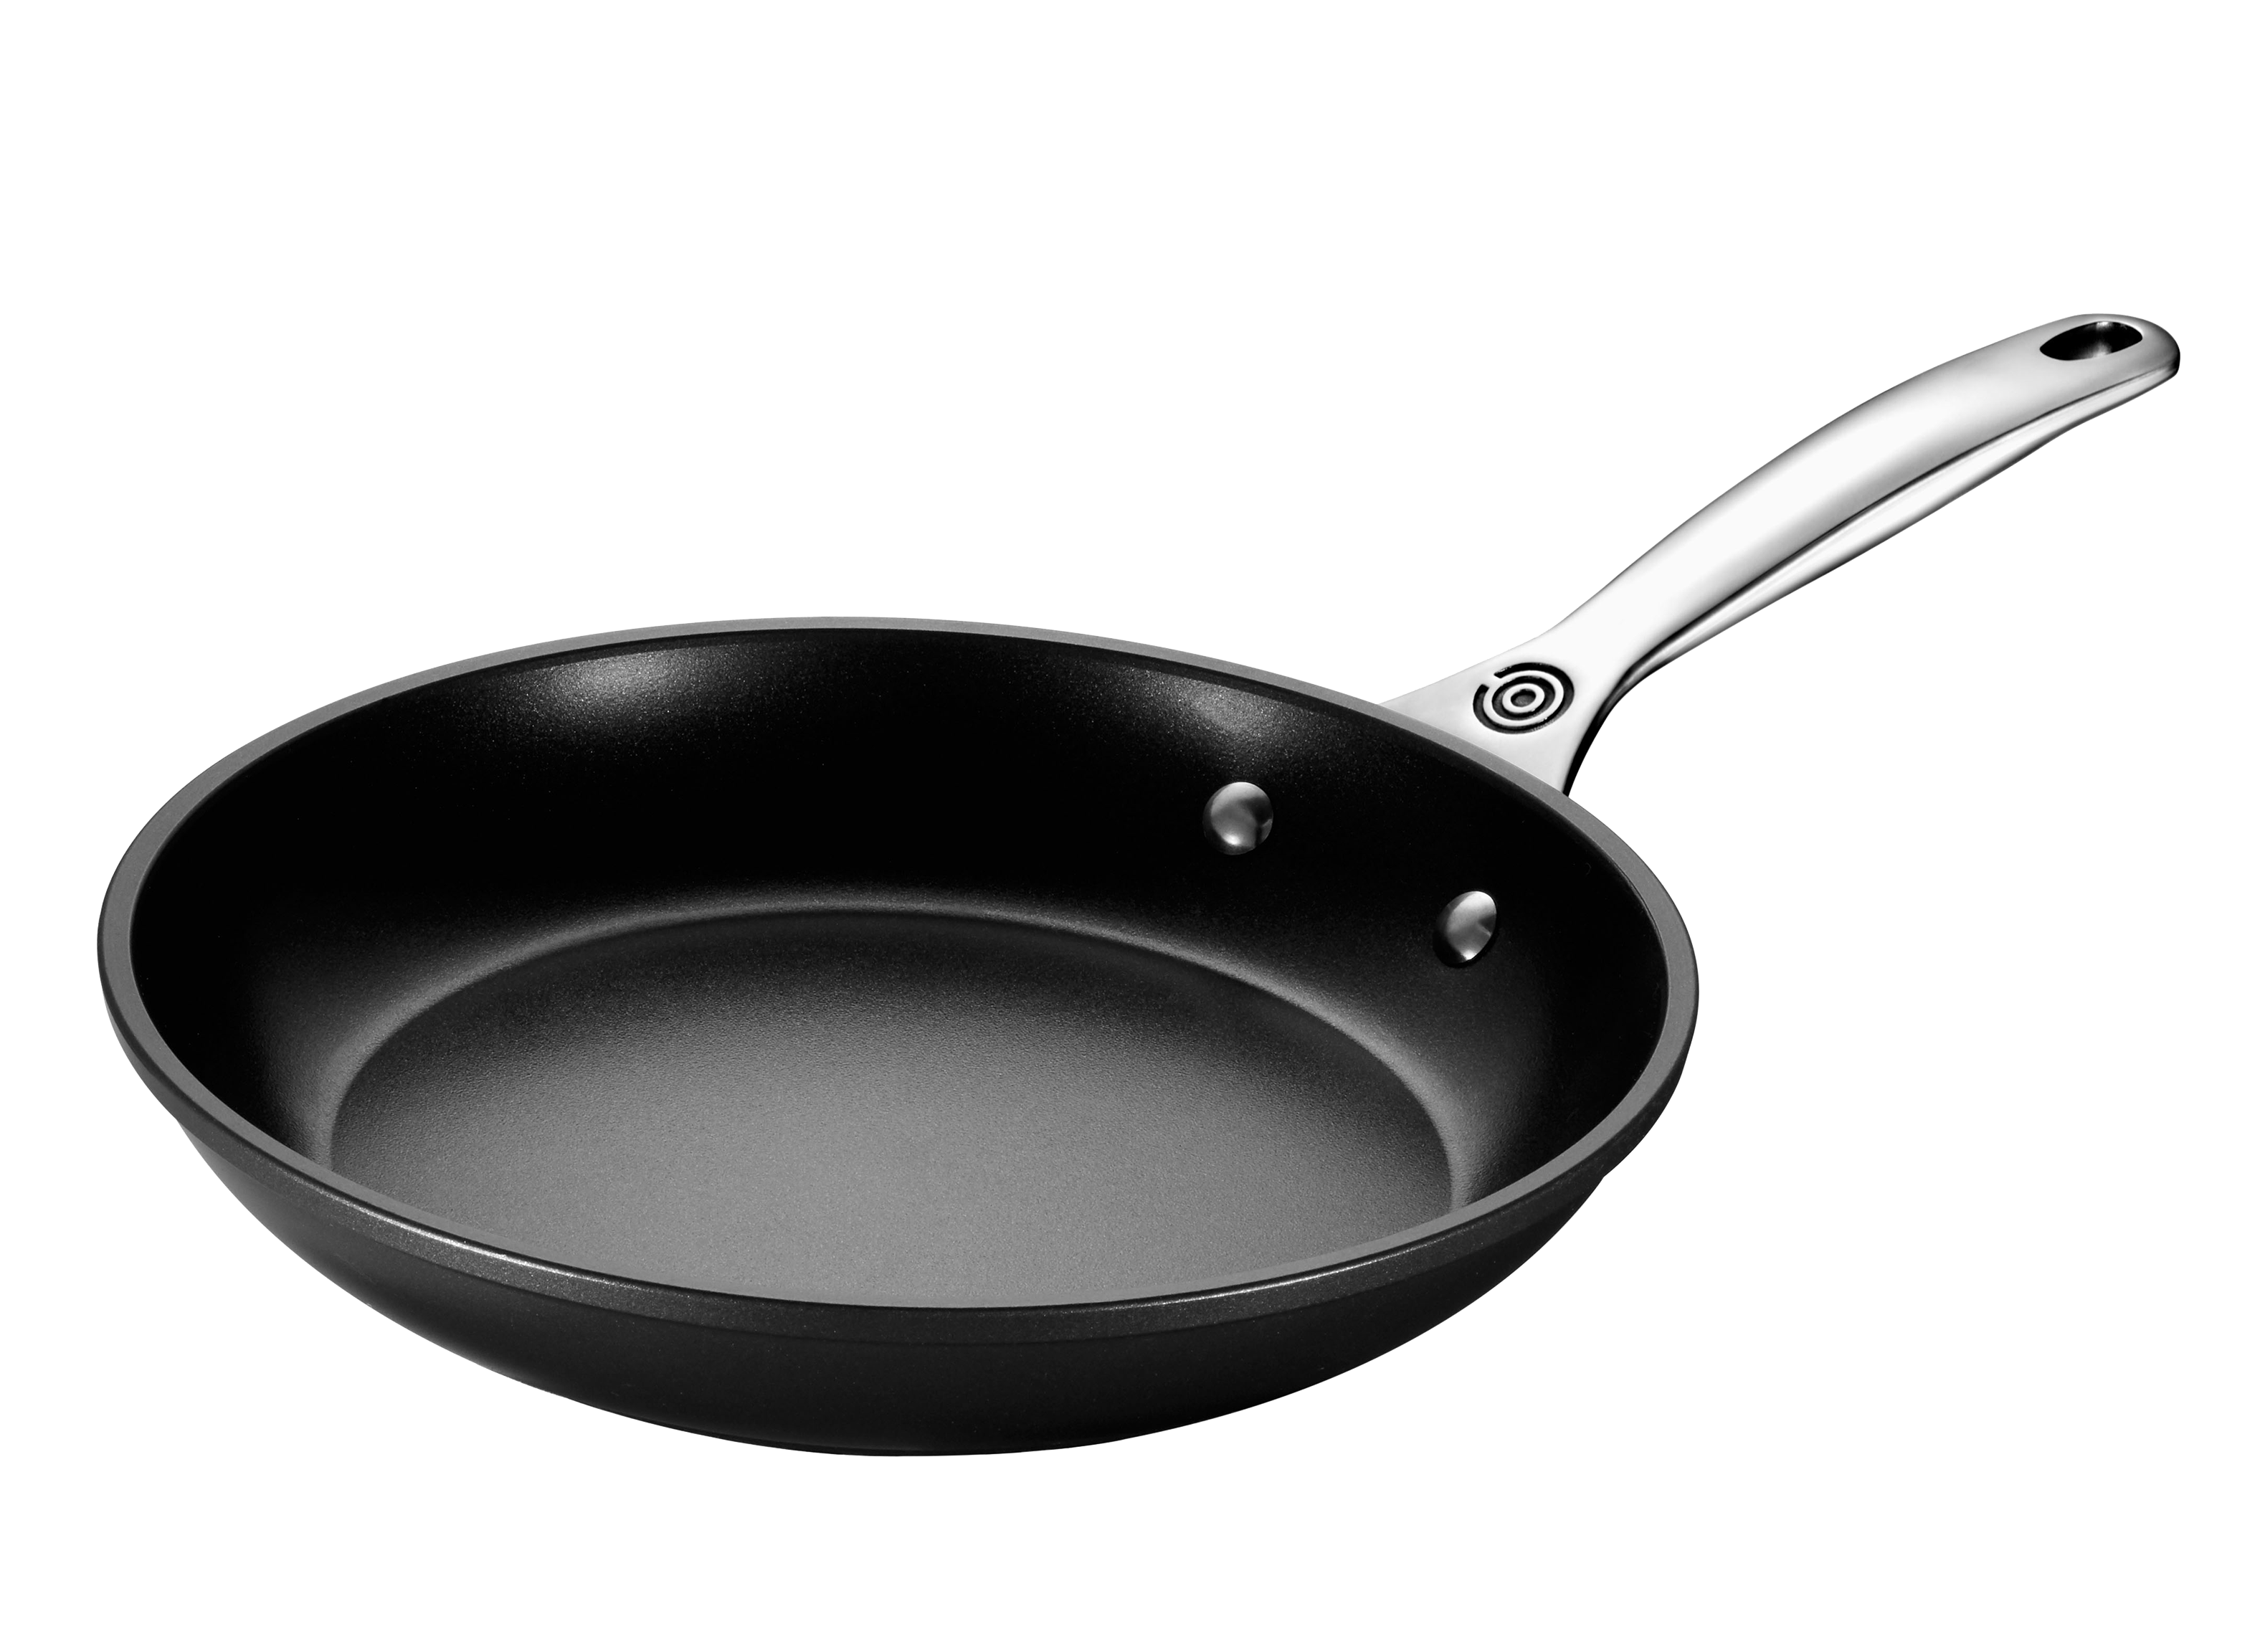 Le Creuset Toughened Nonstick PRO Cookware Review - Consumer Reports